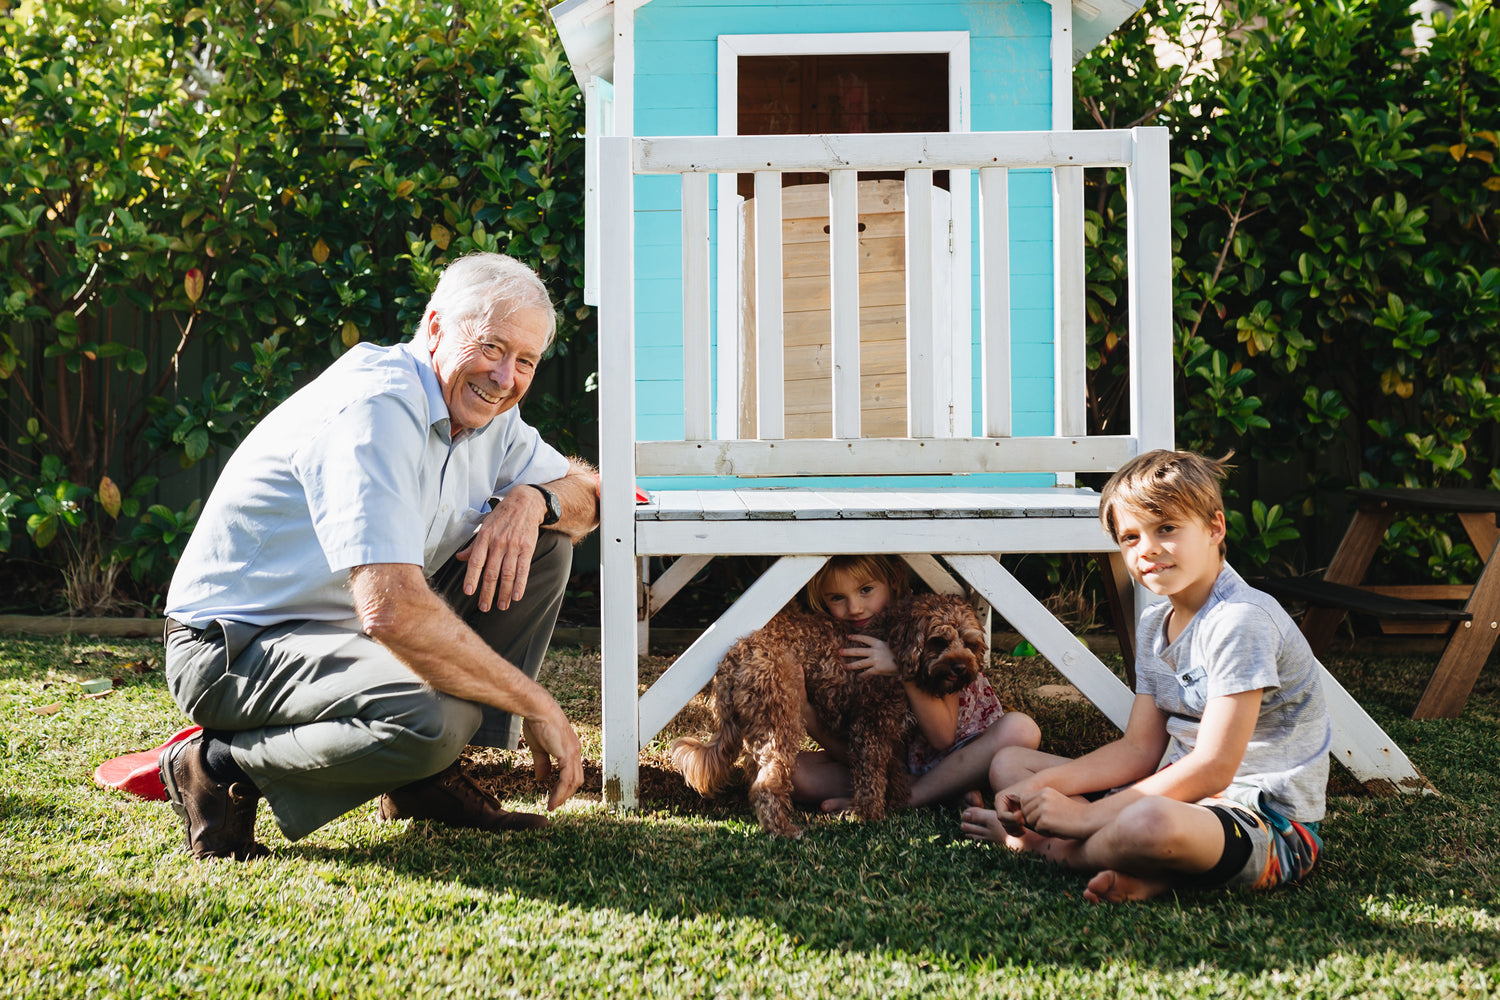 Hoselink founder Tim Kierath with two of his grandchildren and his pet dog enjoying the garden together